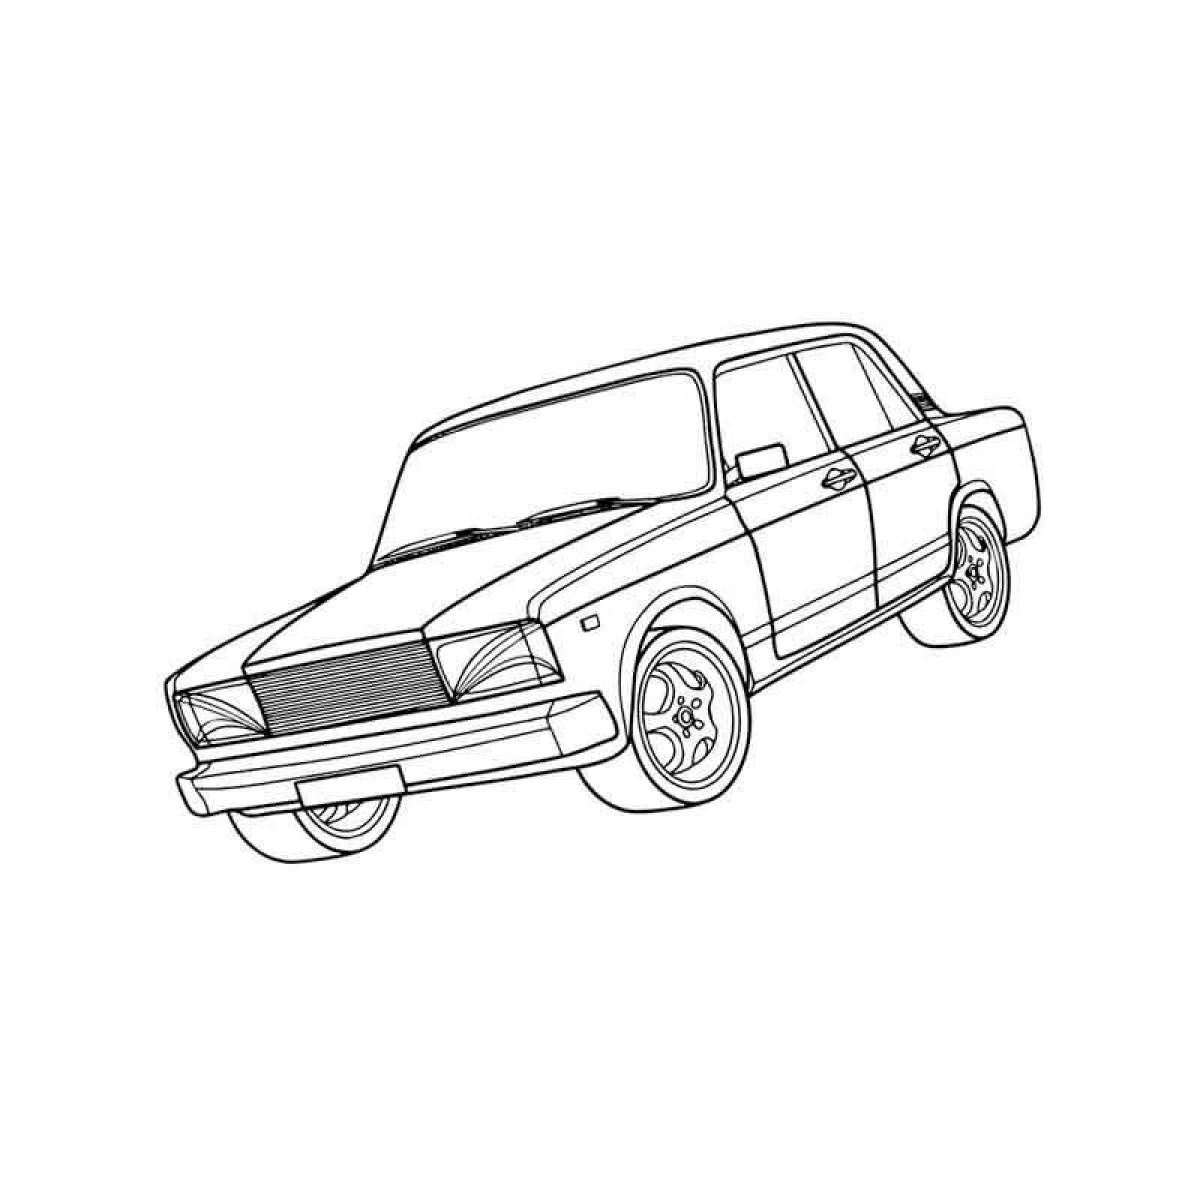 Great car coloring page